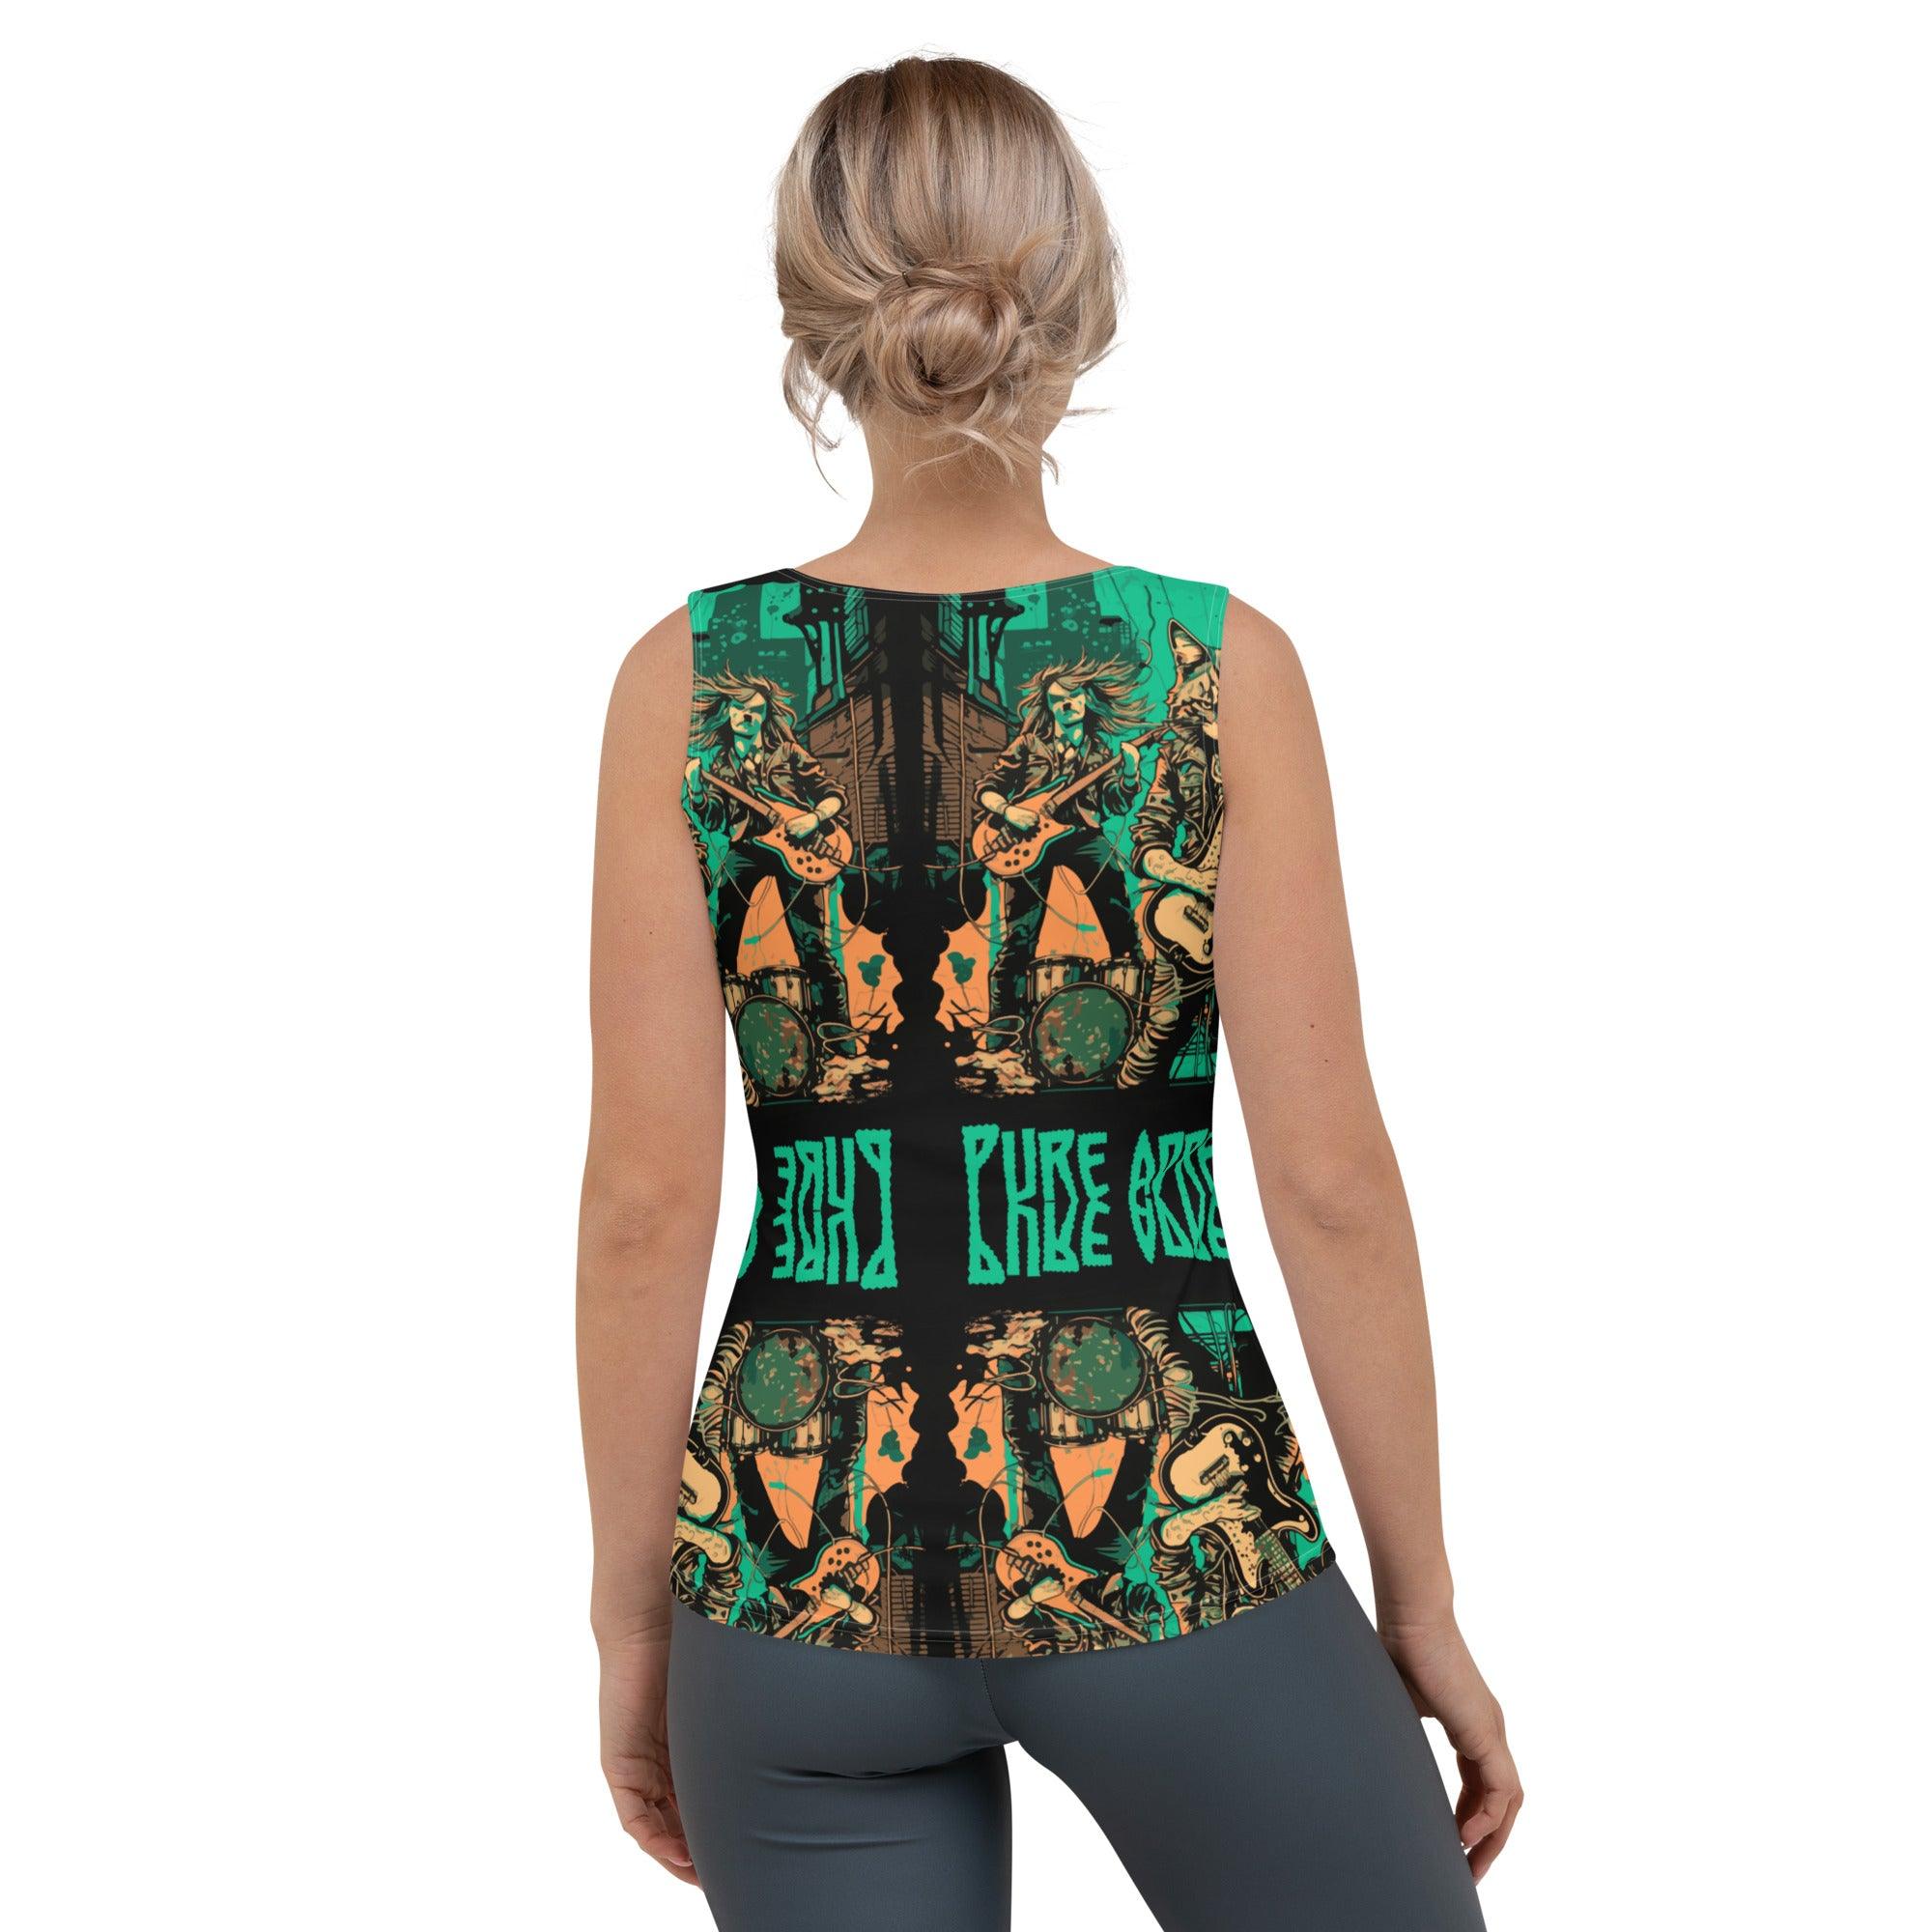 Sound Of Adrenaline Sublimation Cut & Sew Tank Top - Beyond T-shirts